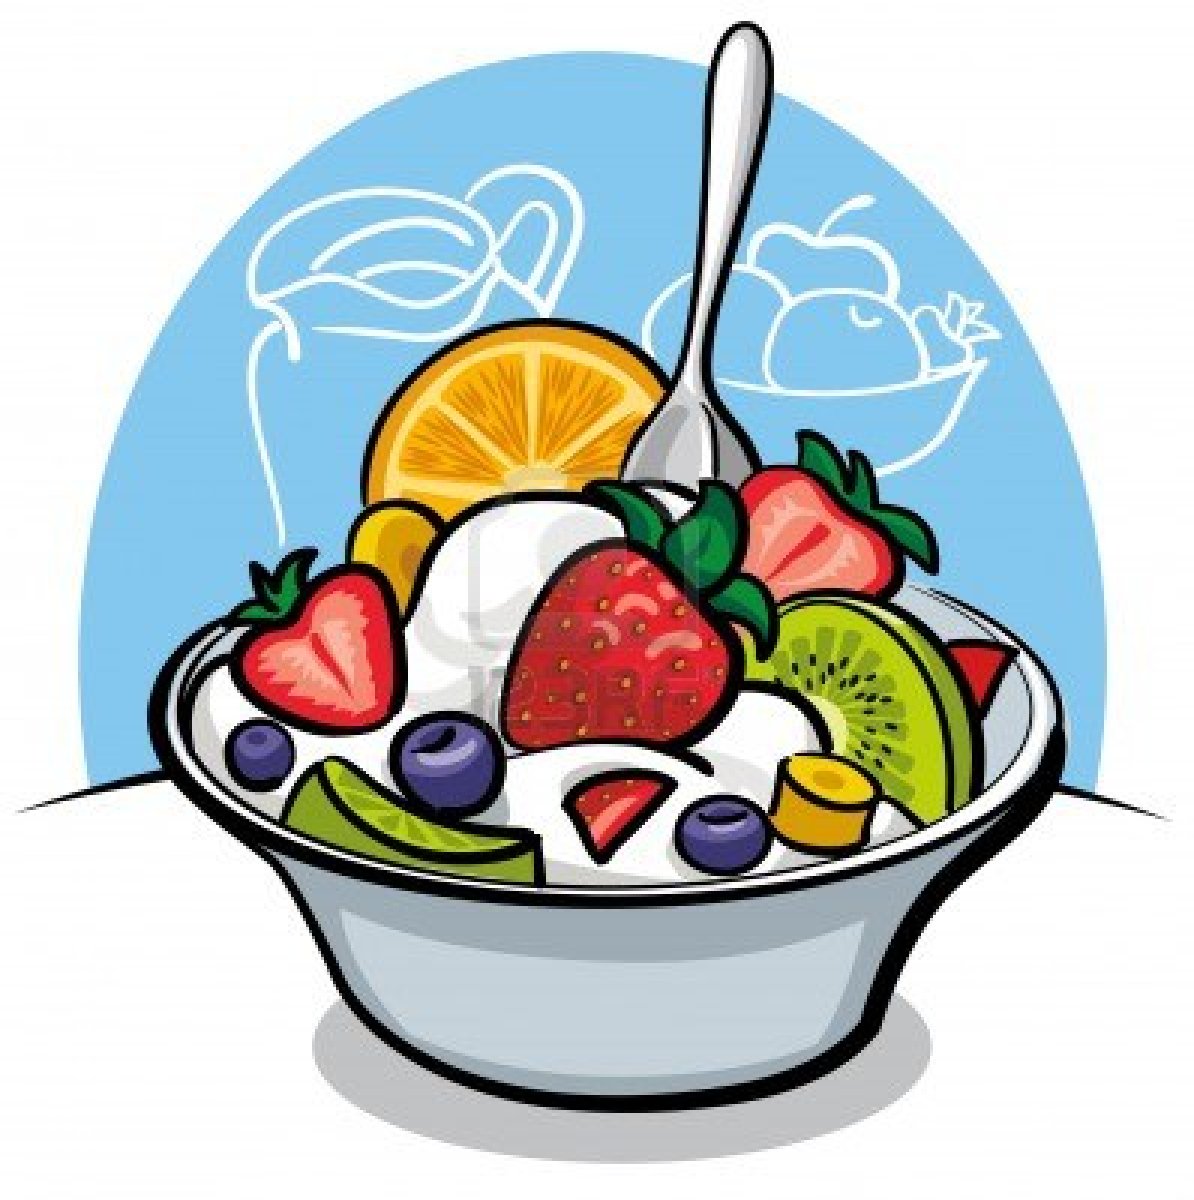 Fruit Salad Clipart Black And White | Clipart Panda - Free Clipart ...